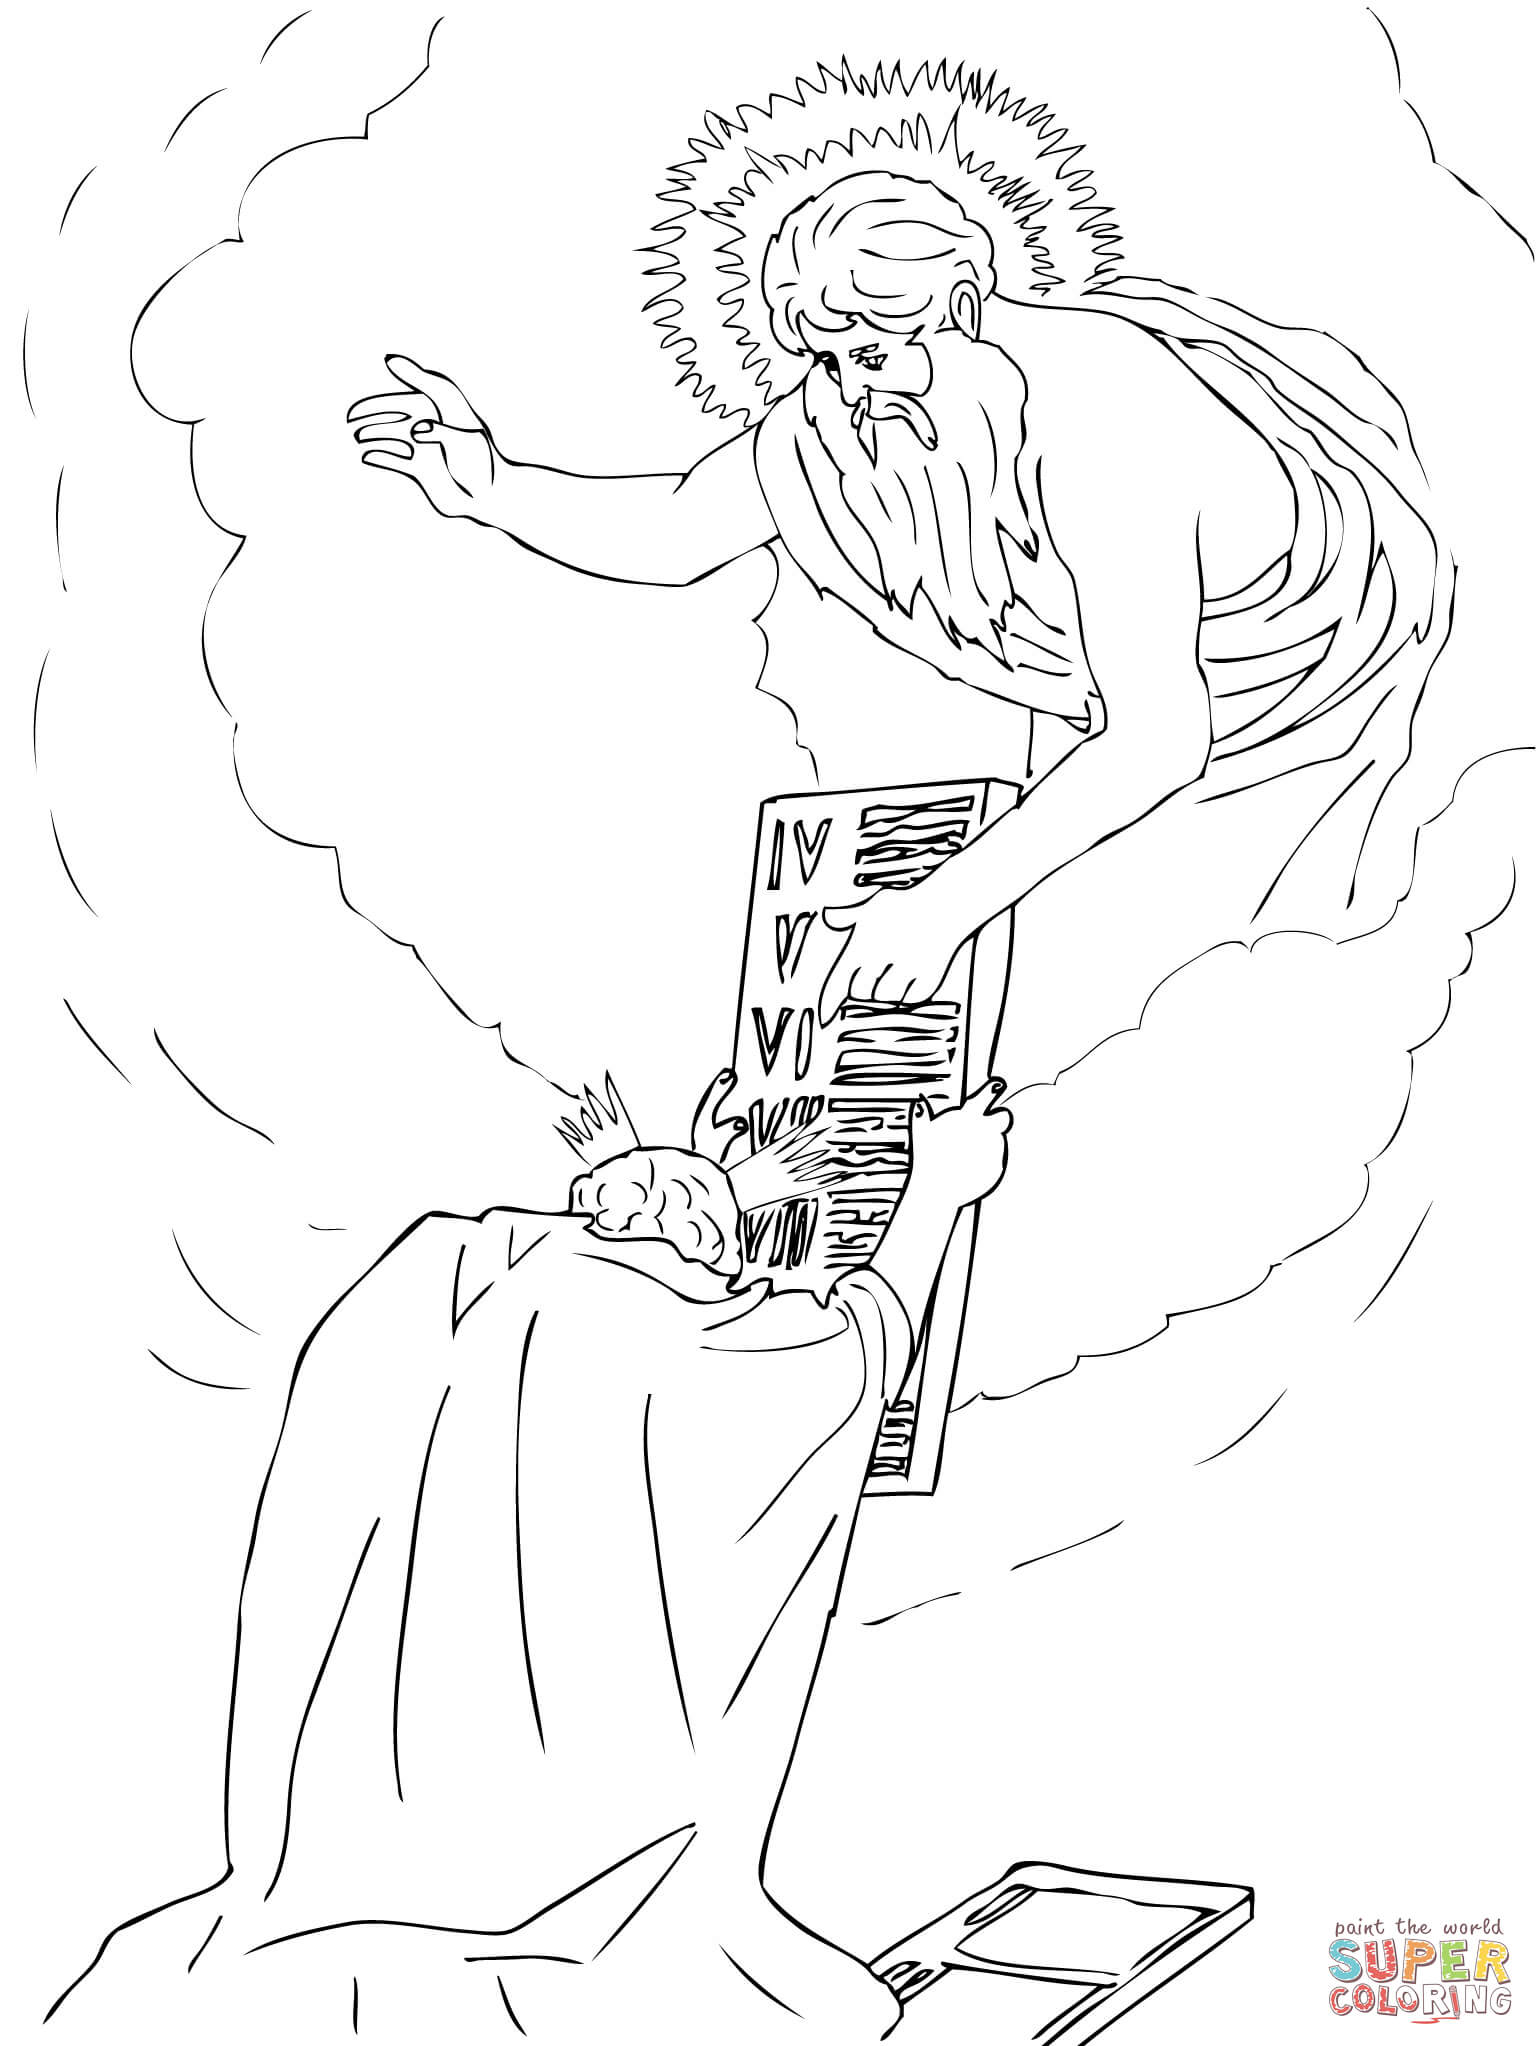 Moses Receiving the Tablets coloring page | Free Printable Coloring Pages